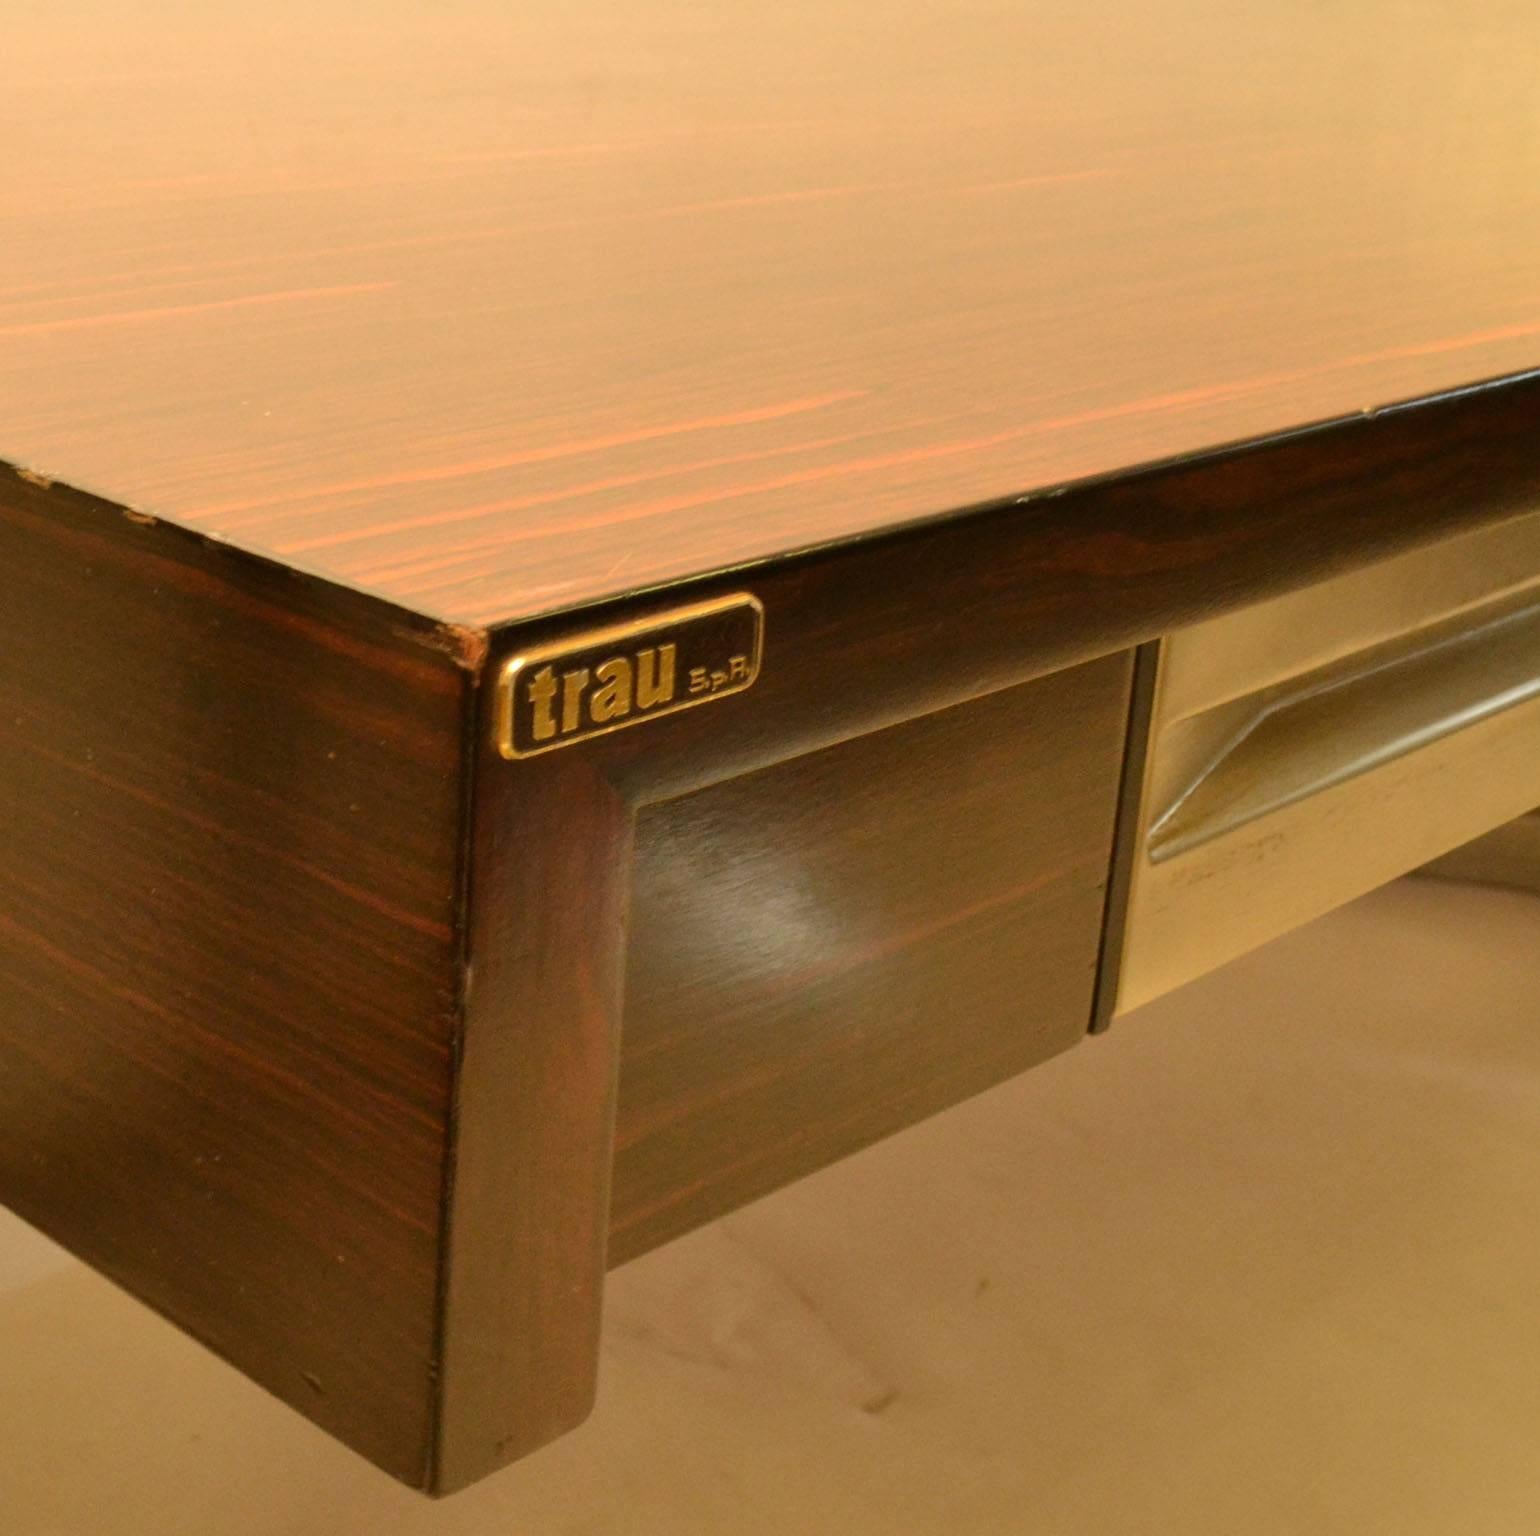 European Large 1960s Executive Desk  by Trau, Italy with Wooden Top on Curved Metal Legs 